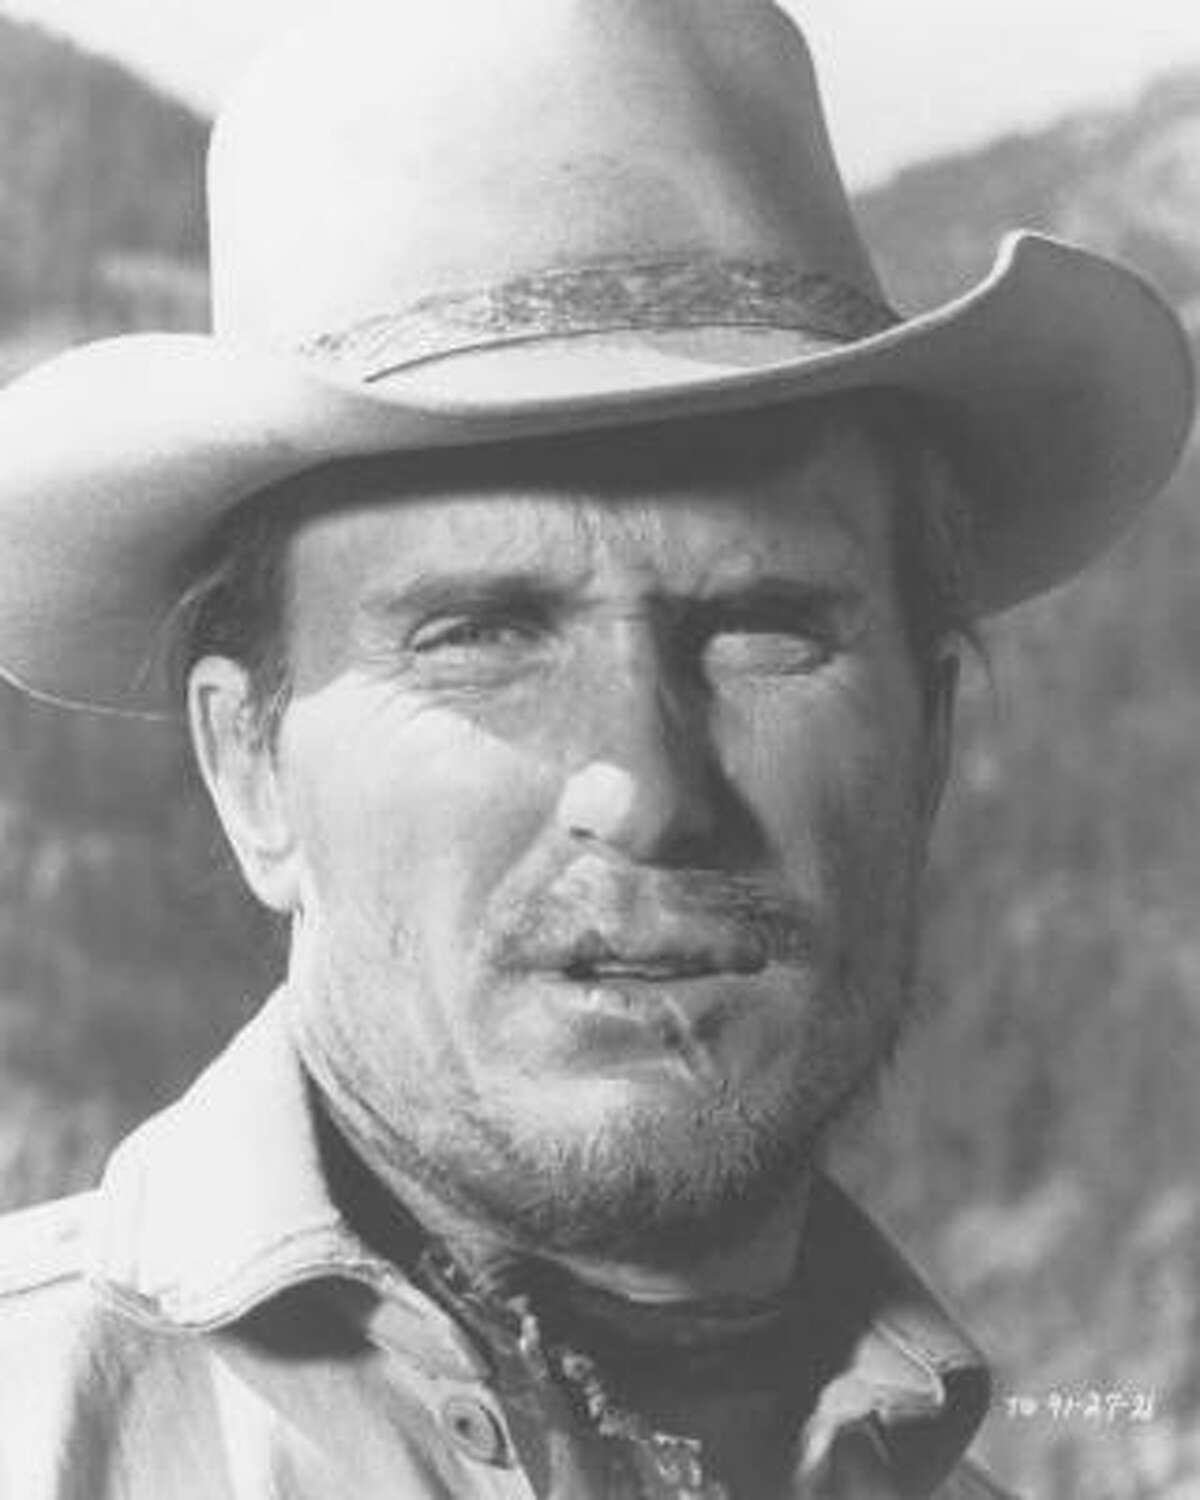 9. Robert Duvall: He’s starred in only four westerns, two of them mini-series, but he and Kevin Costner are the only ones who still seem interested in the genre. Duvall exudes authentic western grit. Before Lonesome Dove, Geronimo, Open Range and Broken Trail, he was a creepy baddie in True Grit, above.